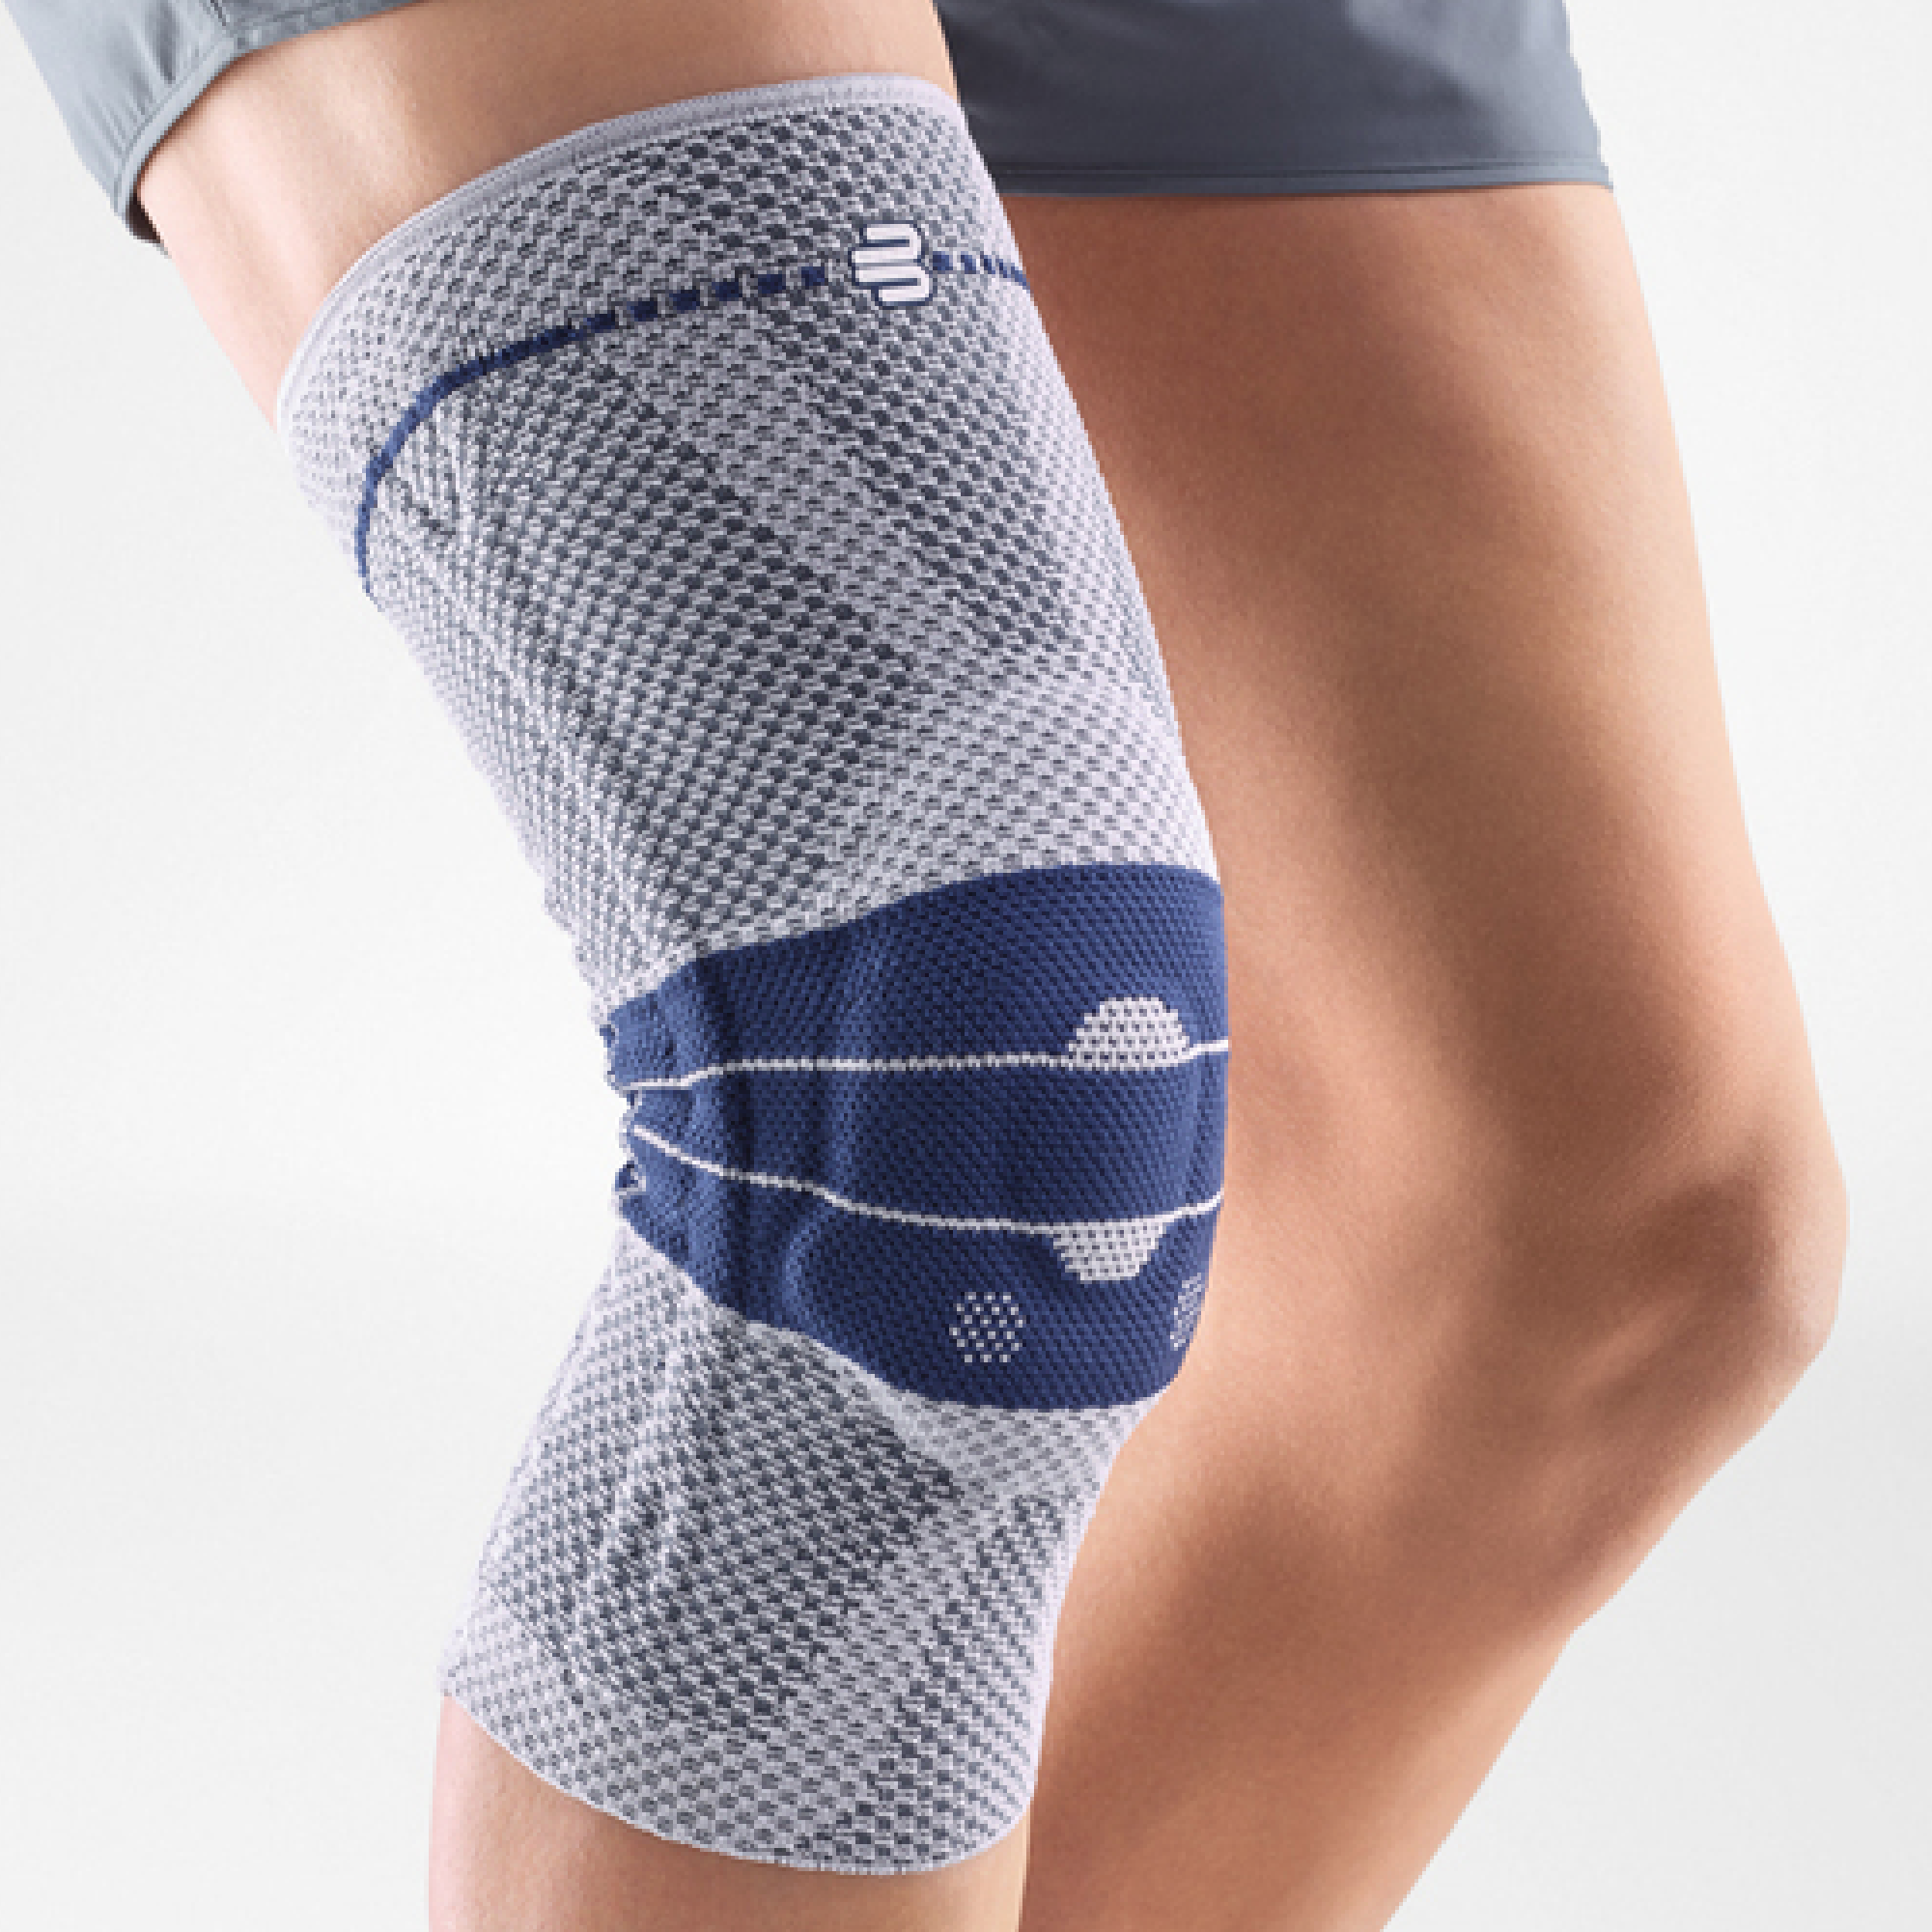 Knee Brace With Patella Gel and Stays Support for Inflammation, Swelling &  Kneecap Pain